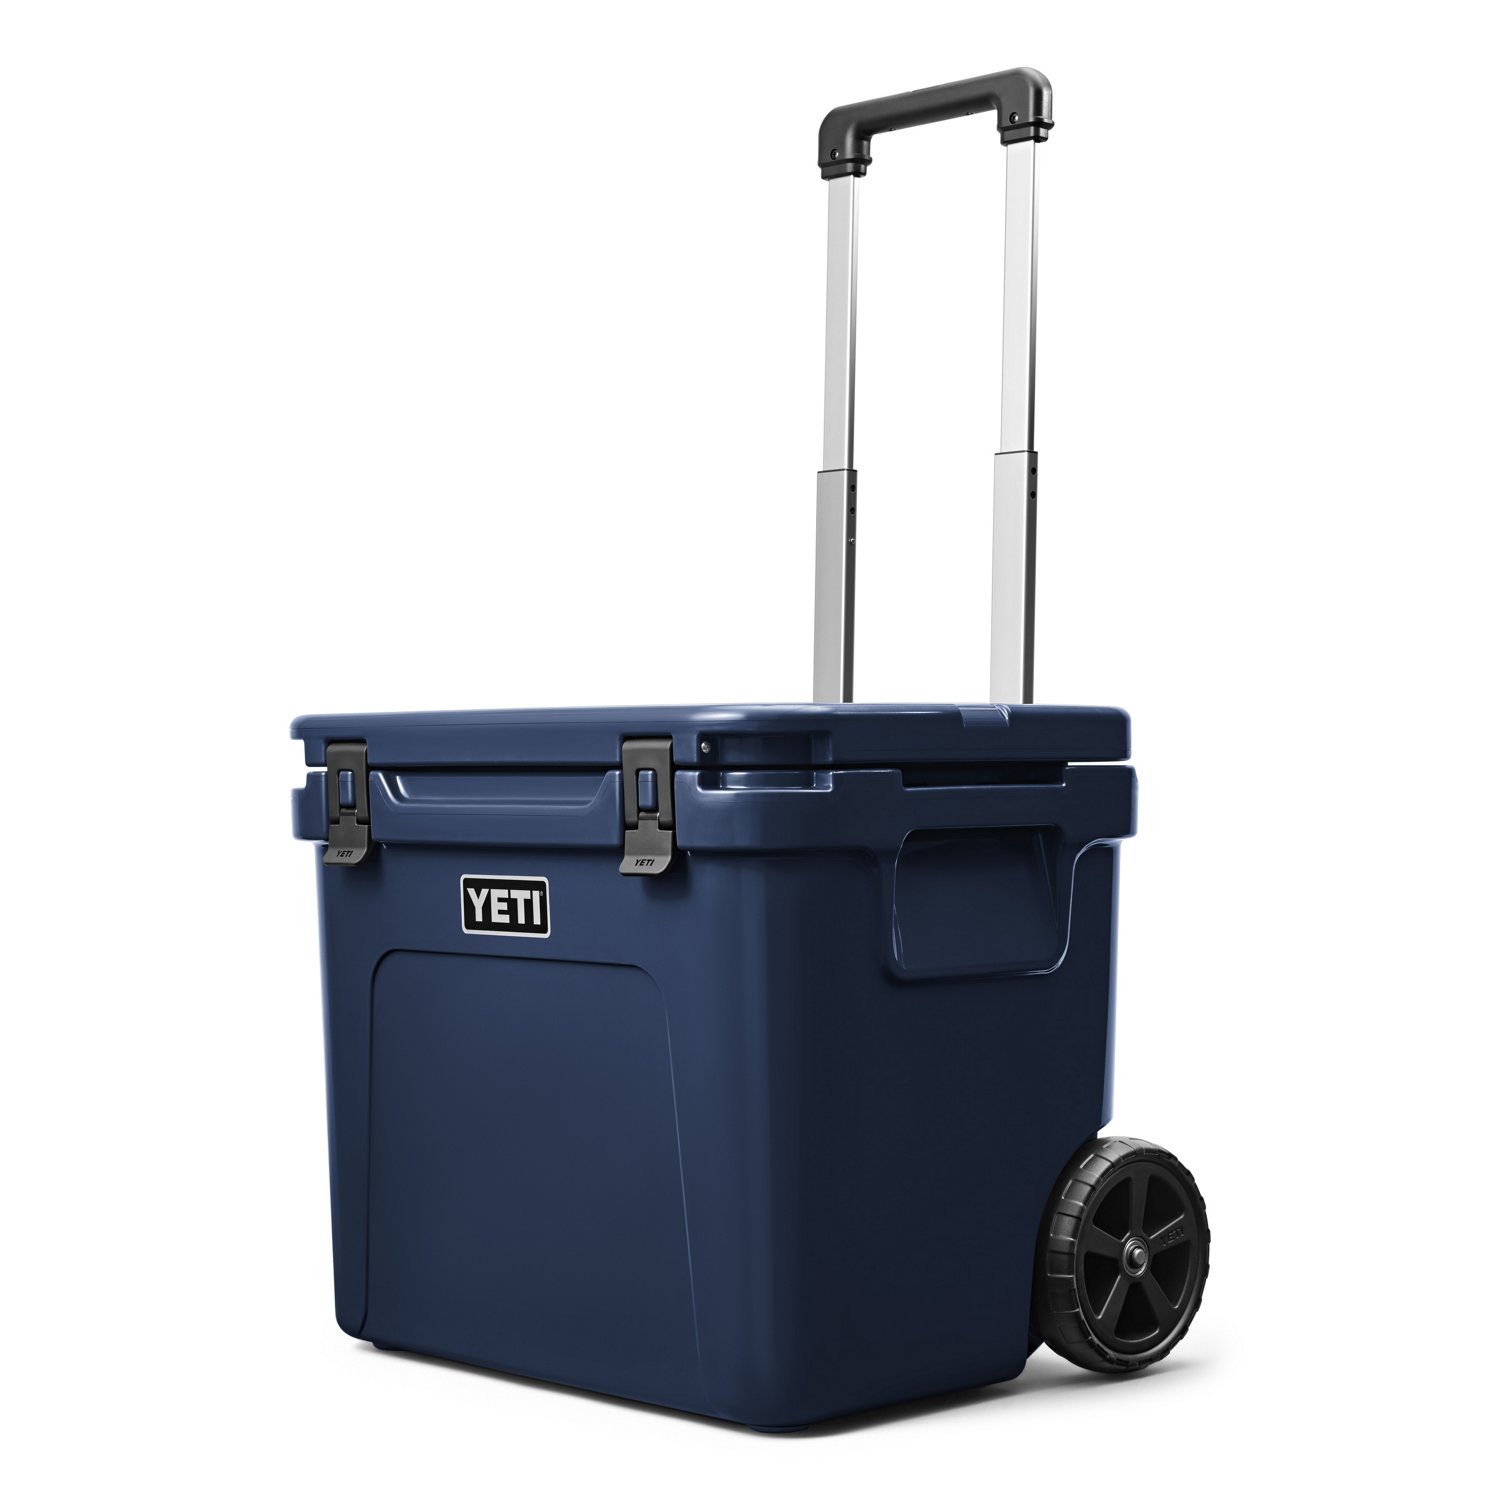 https://academy.scene7.com/is/image/academy///camping/coolers/blue_yeti-roadie-60-wheeled-cooler_10023200000/38649fb3405a47a5966d7184e33ddee6?$pdp-mobile-gallery-ng$